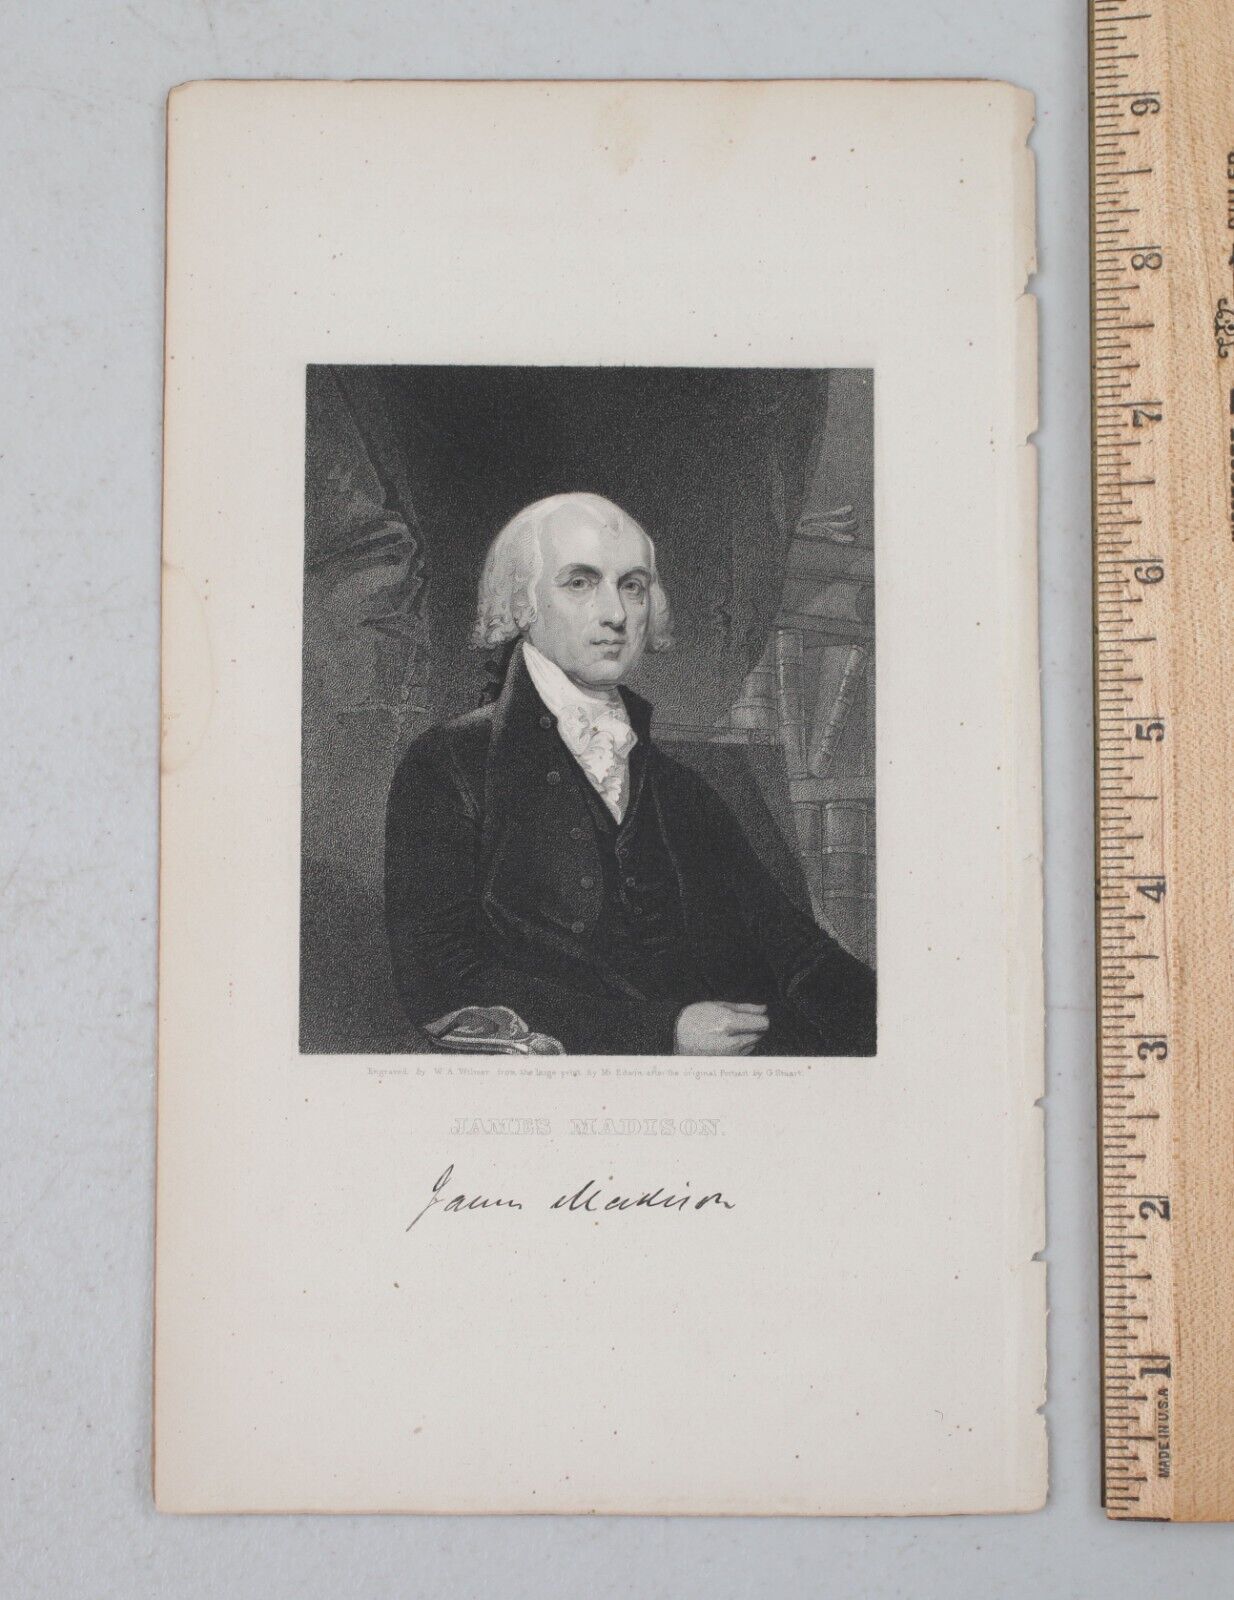 Antique Original 1800s Engraving Print James Madison by W.A. Wilmer 